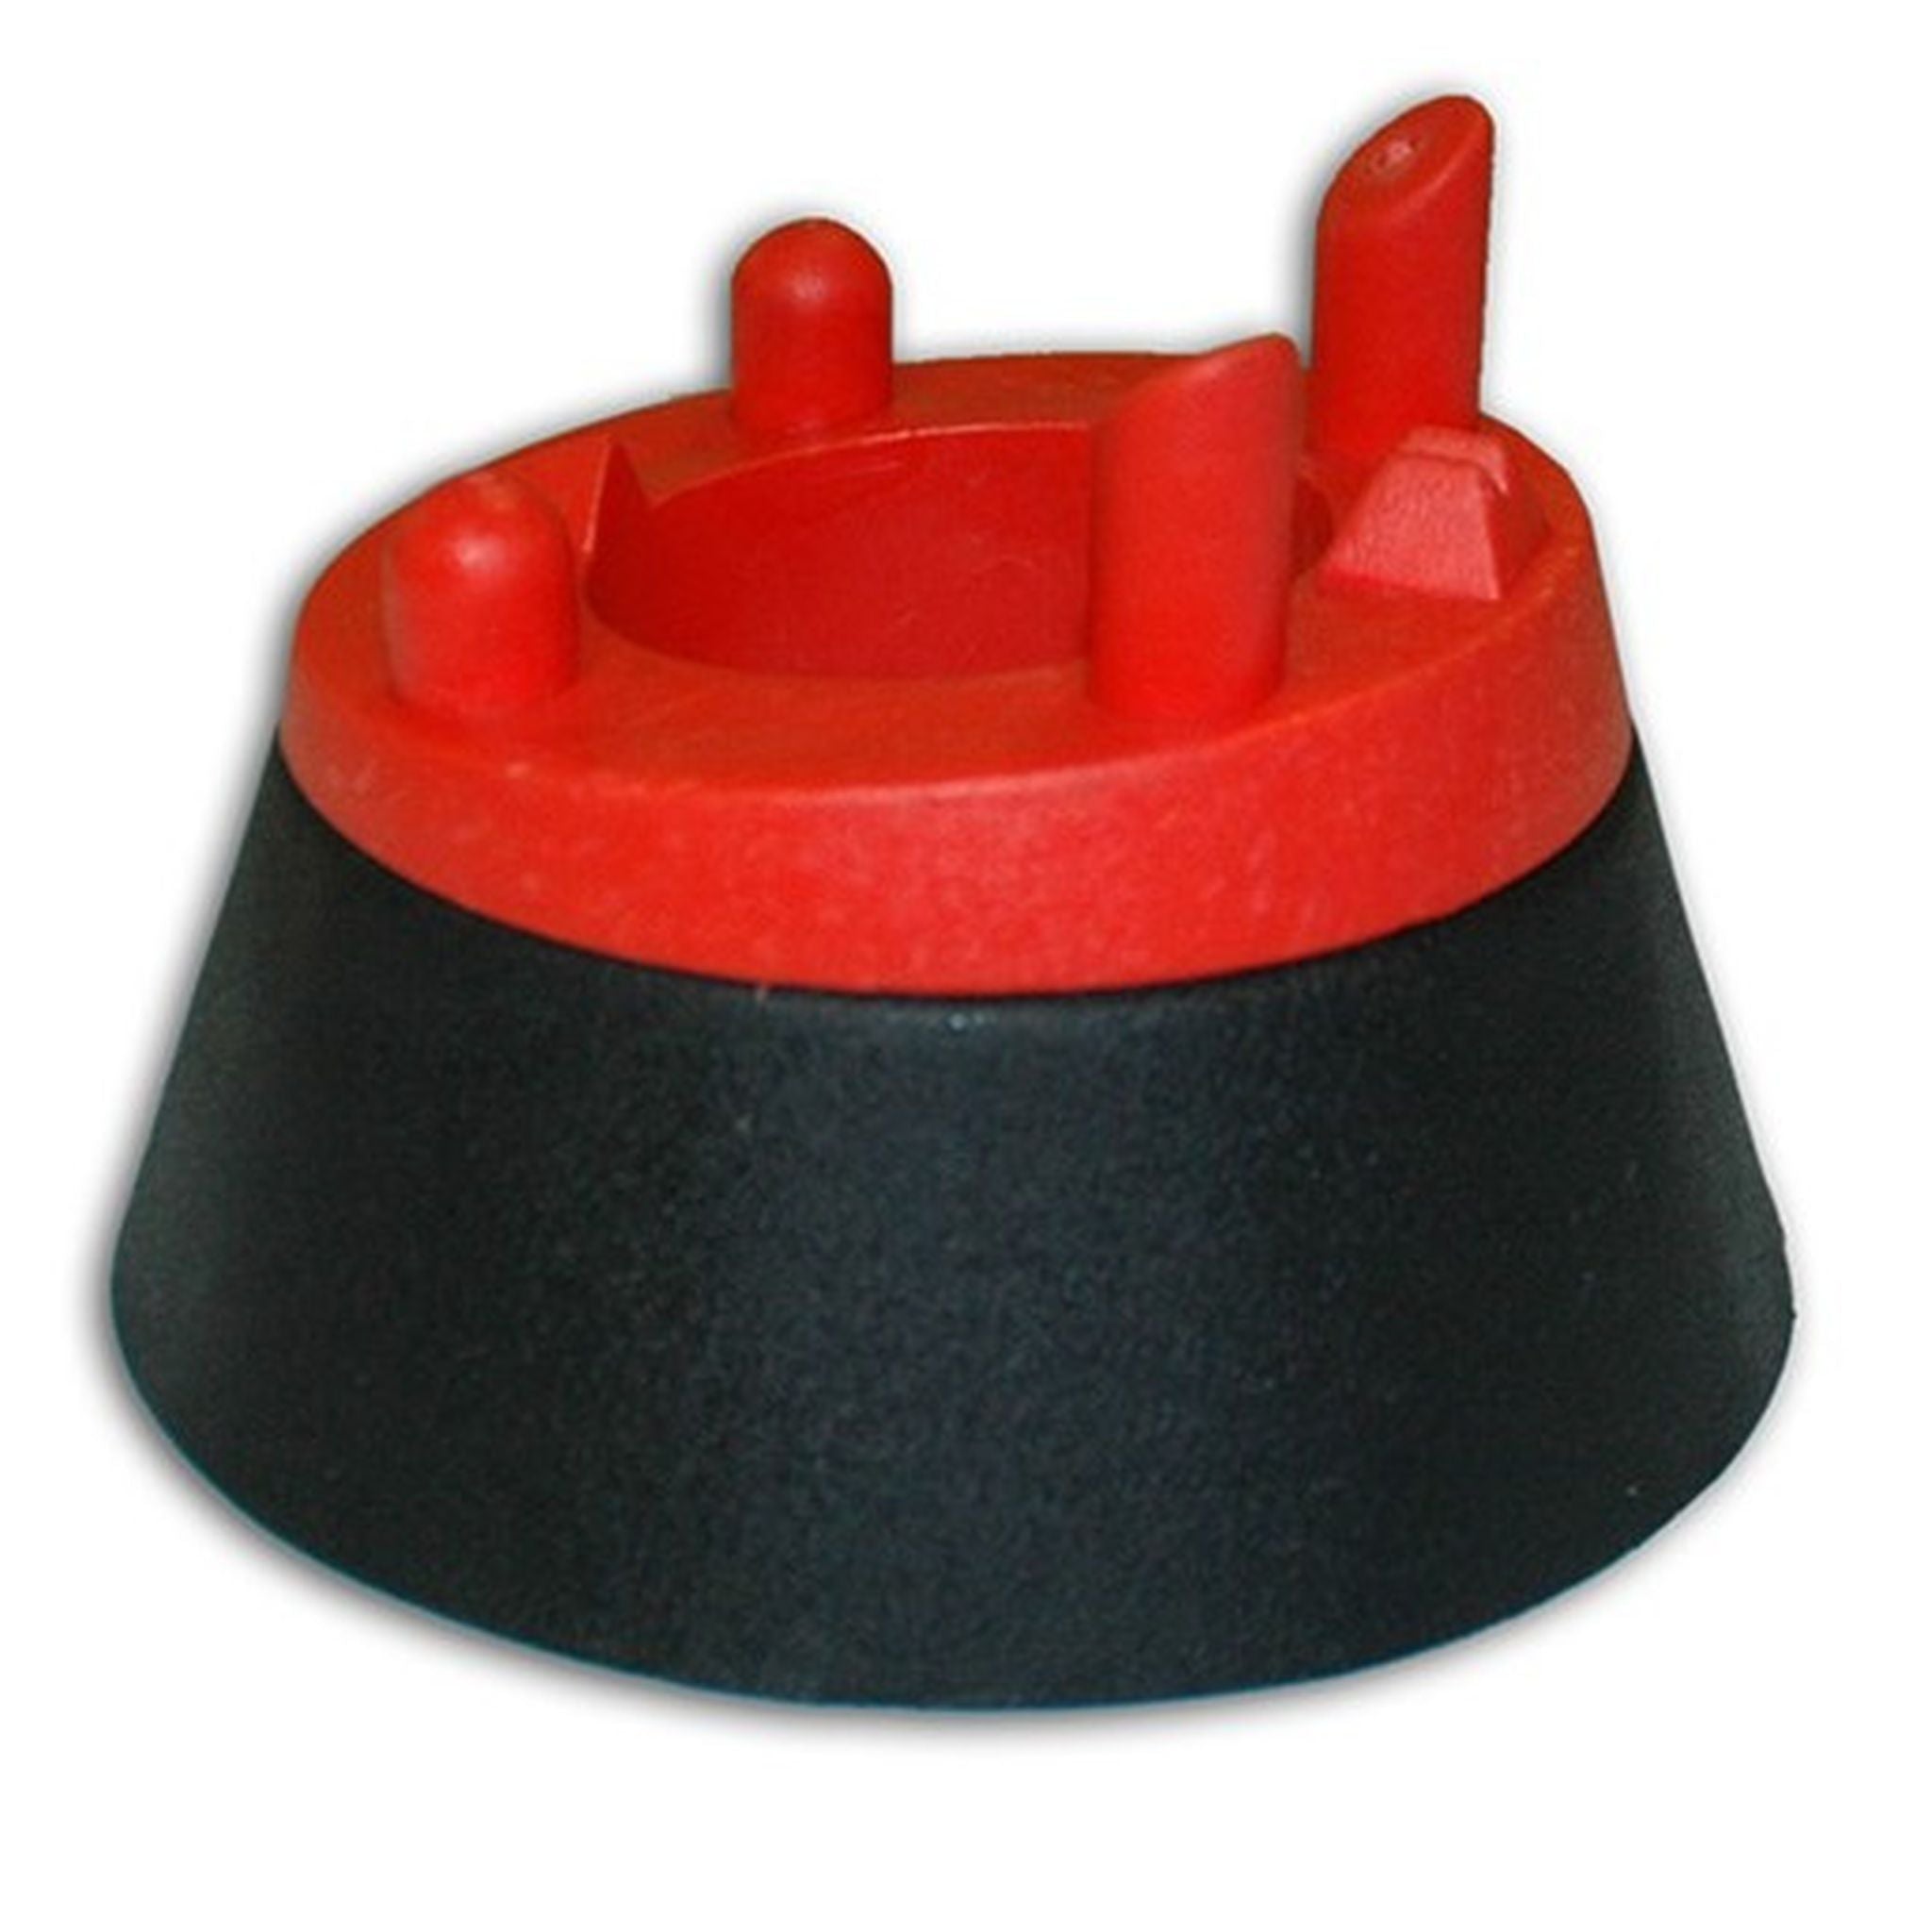 Patrick Deluxe Rugby Kicking Tee - Screw Base